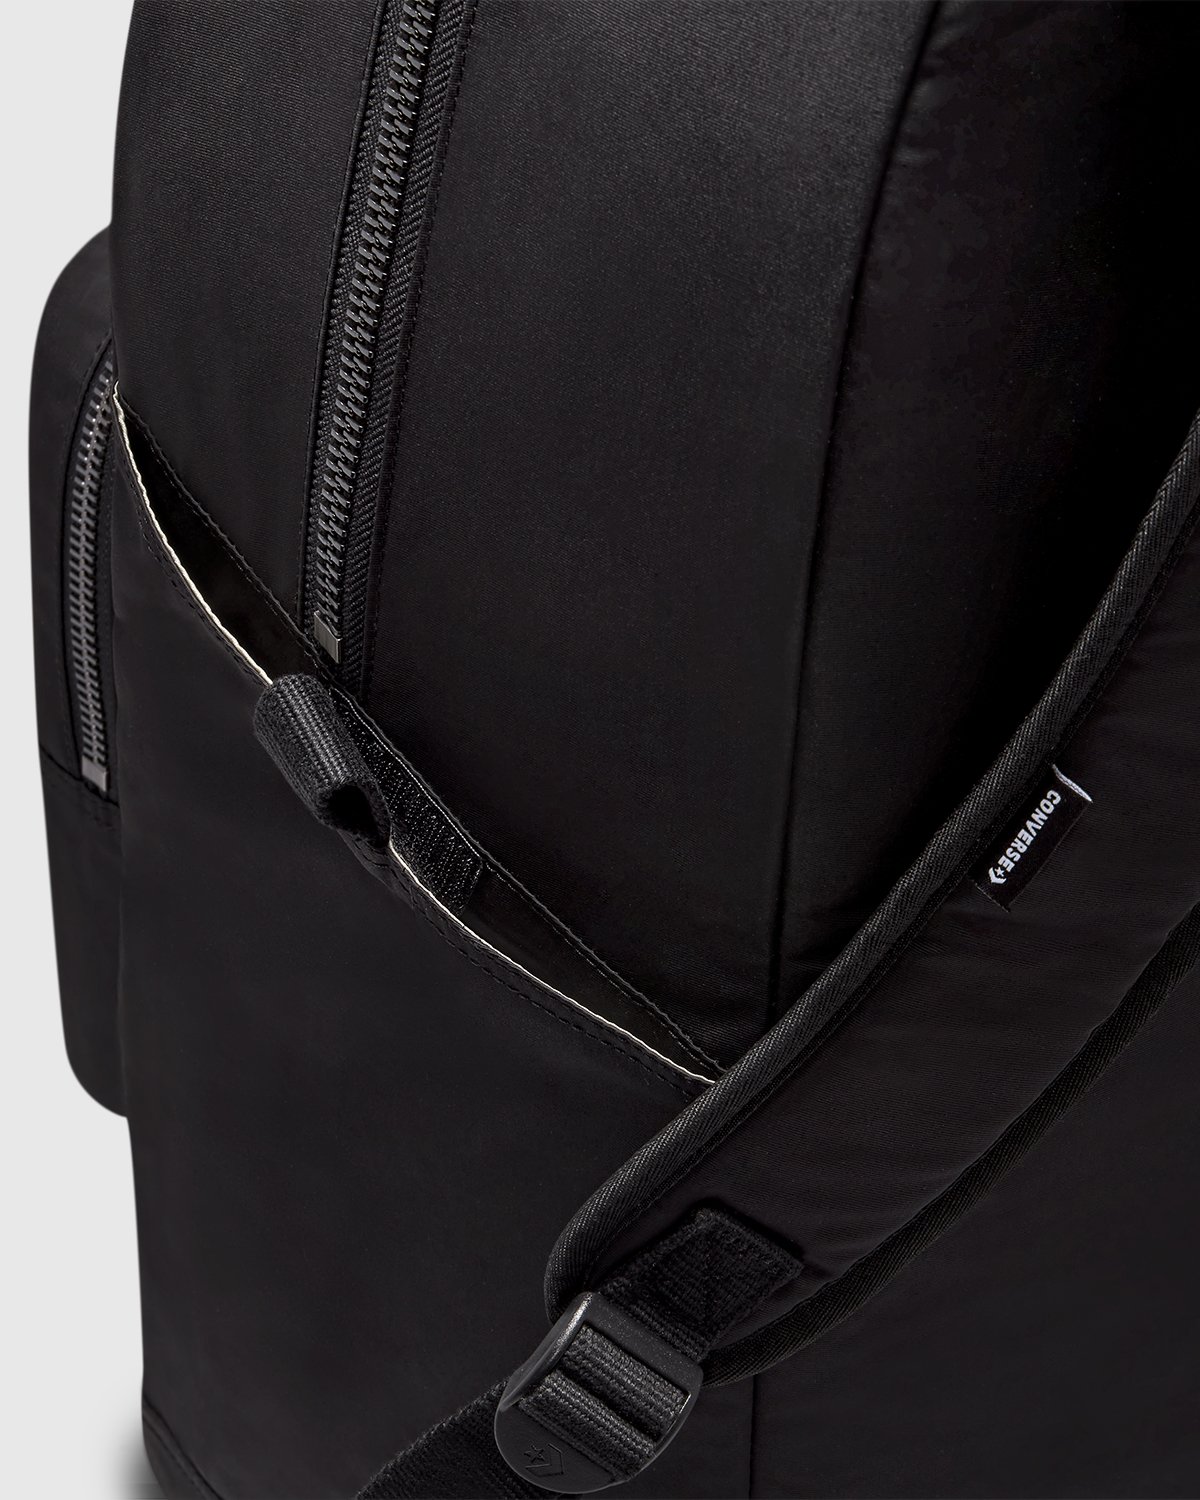 Converse x Rick Owens - Oversized Backpack Black - Accessories - Black - Image 6